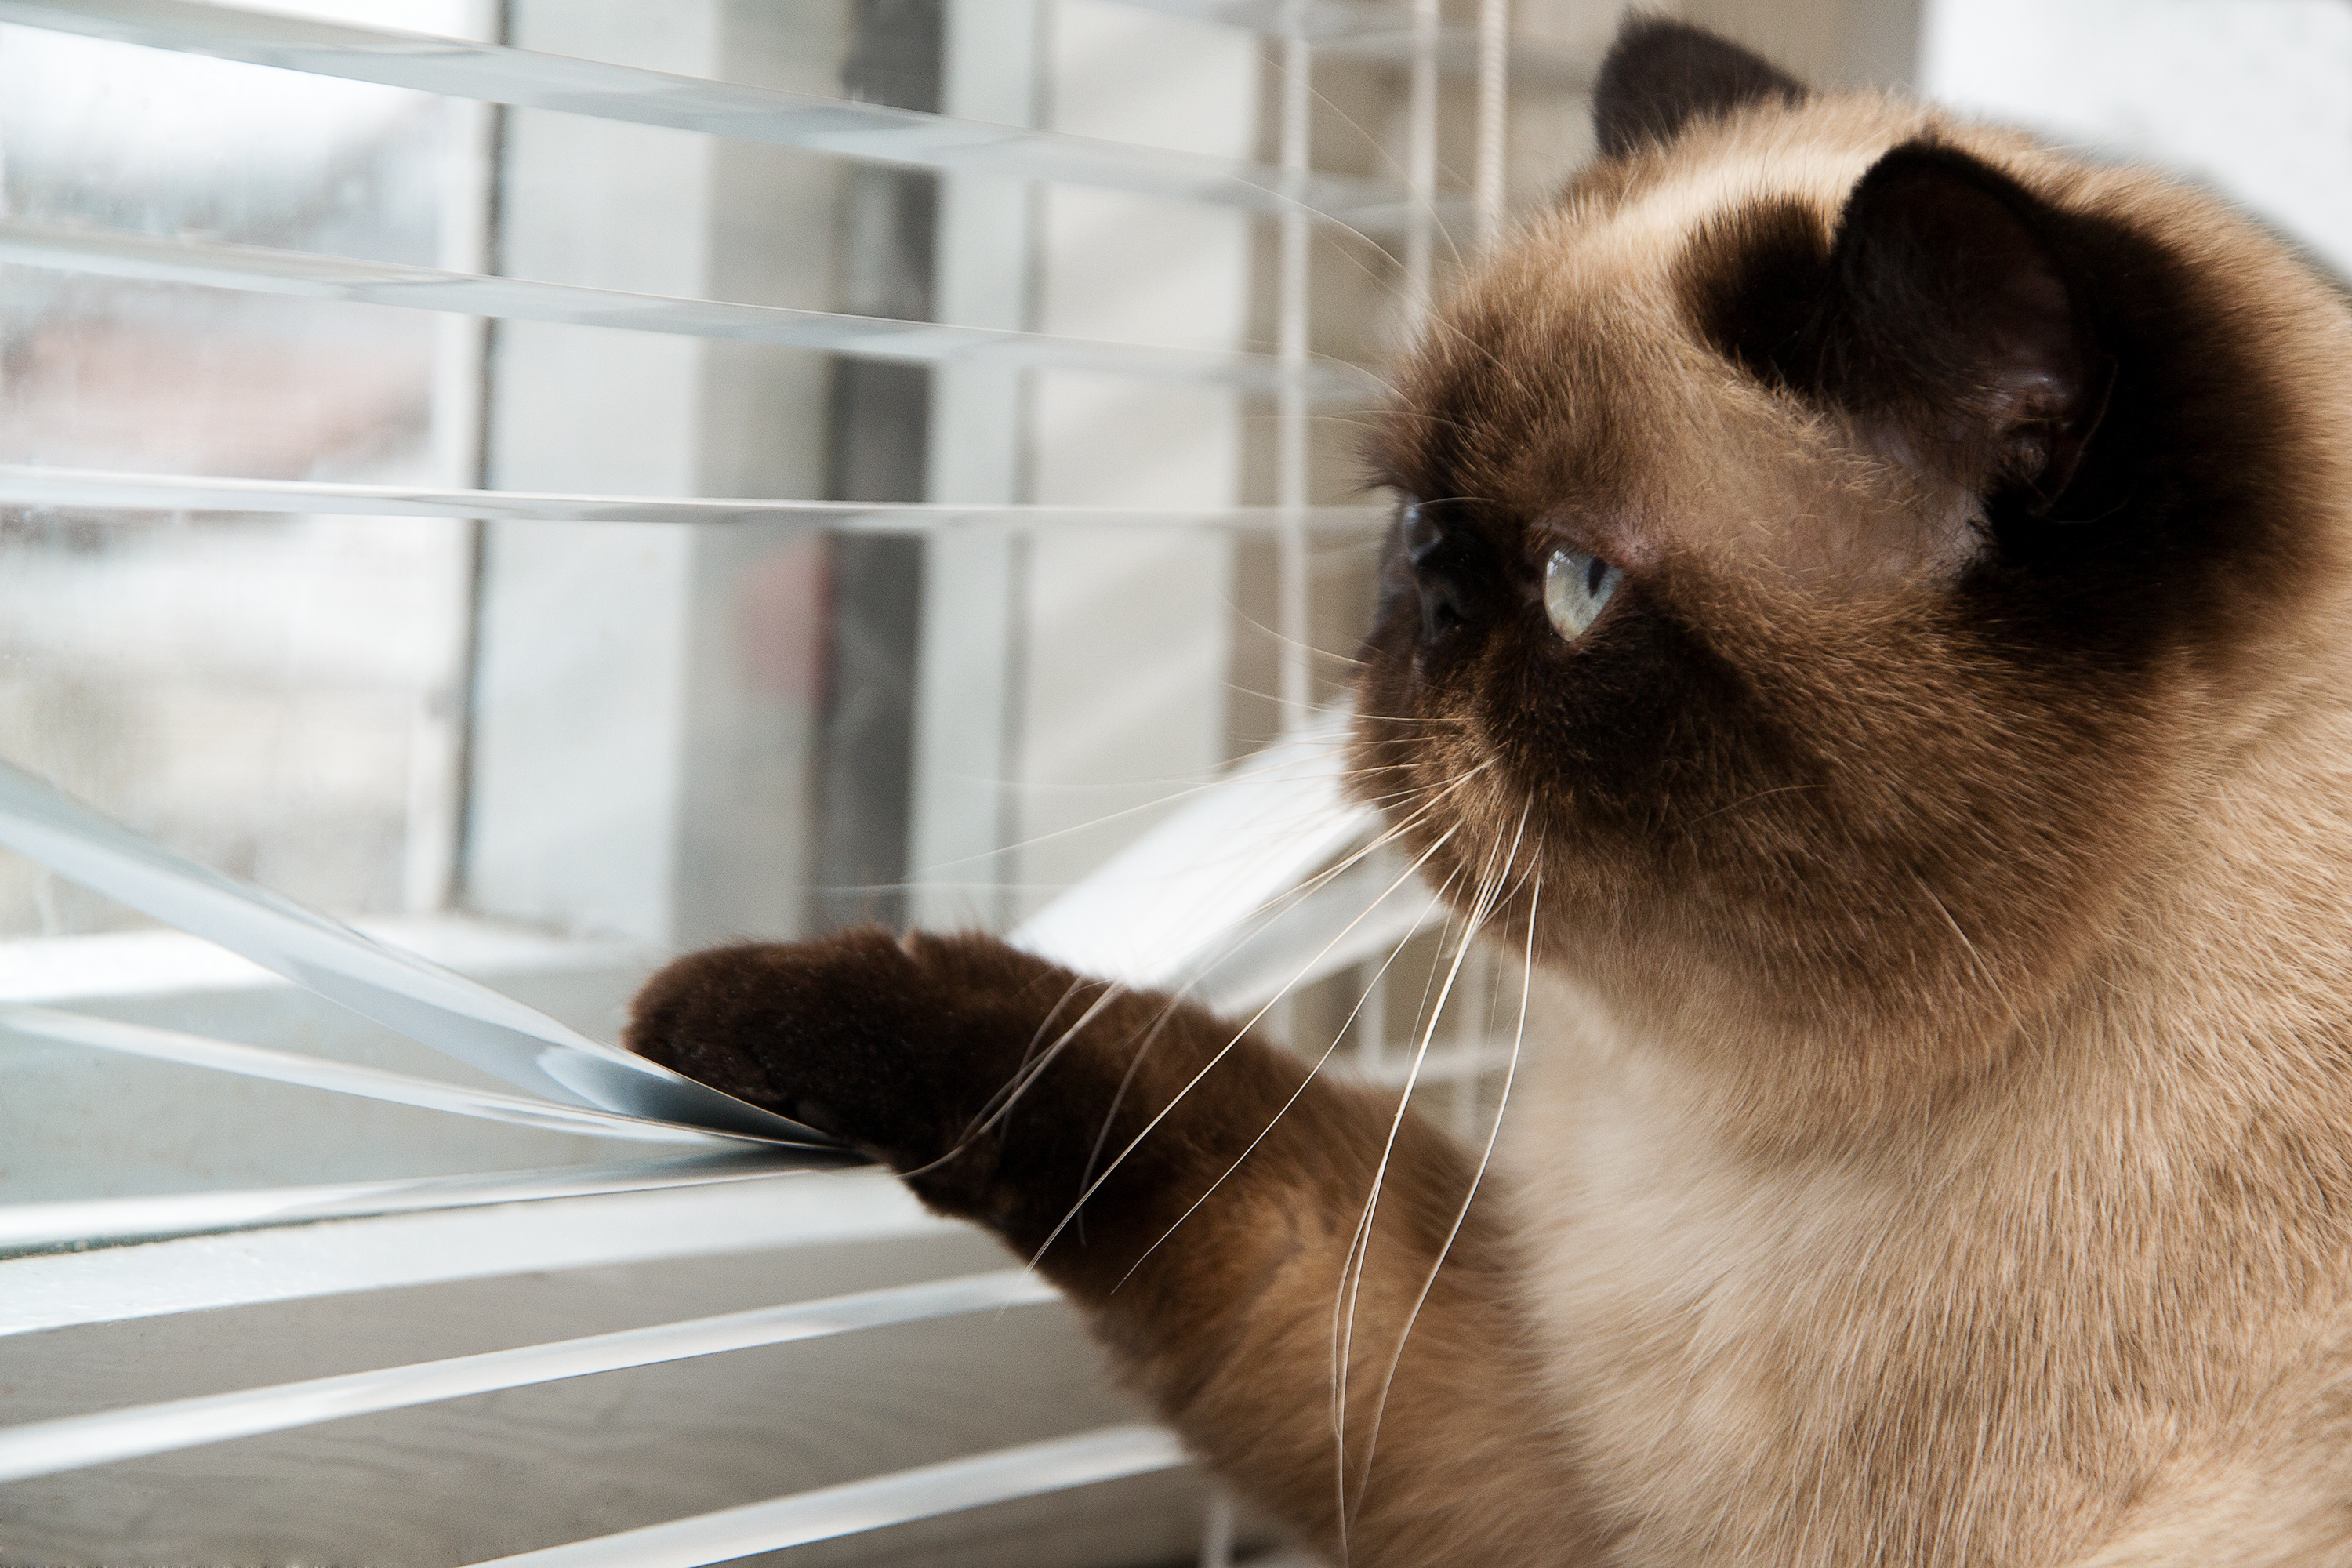 Cat looking outside through window blinds